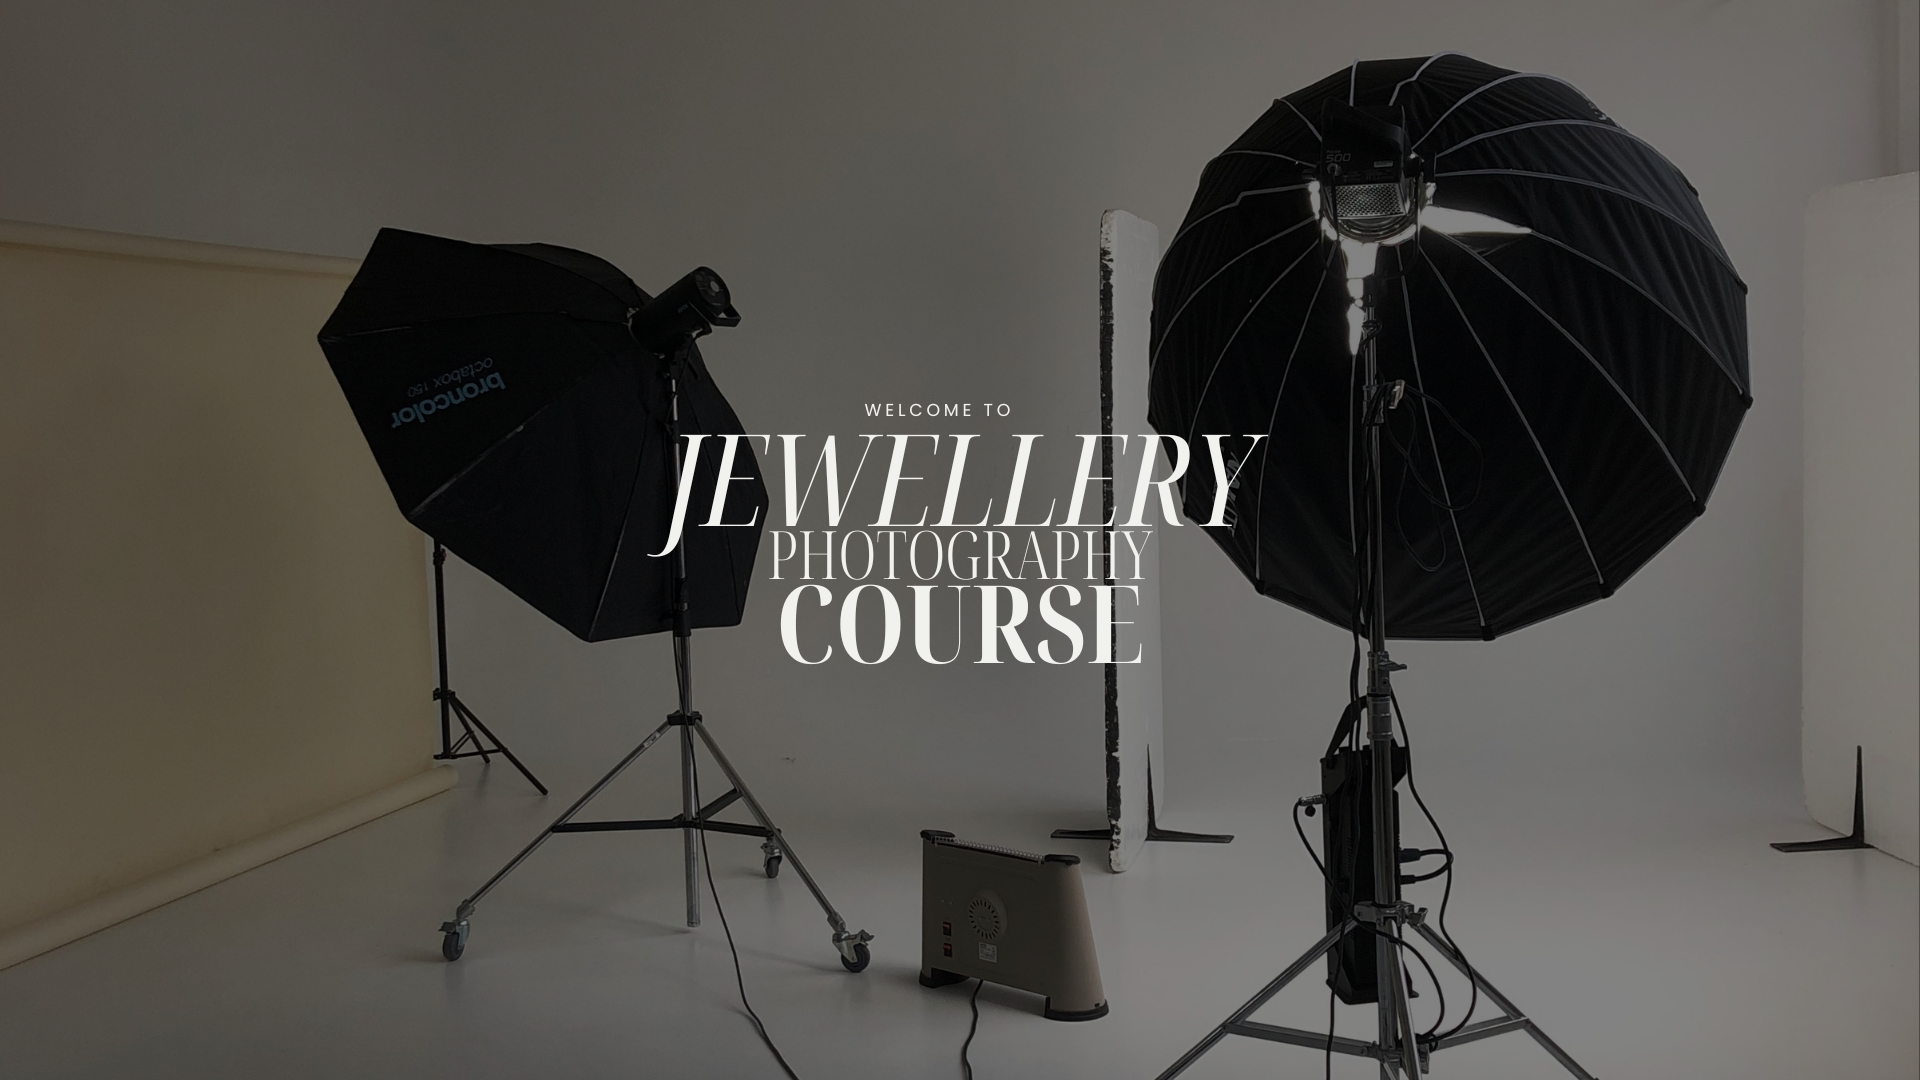 Jewellery Photography course – Auguste